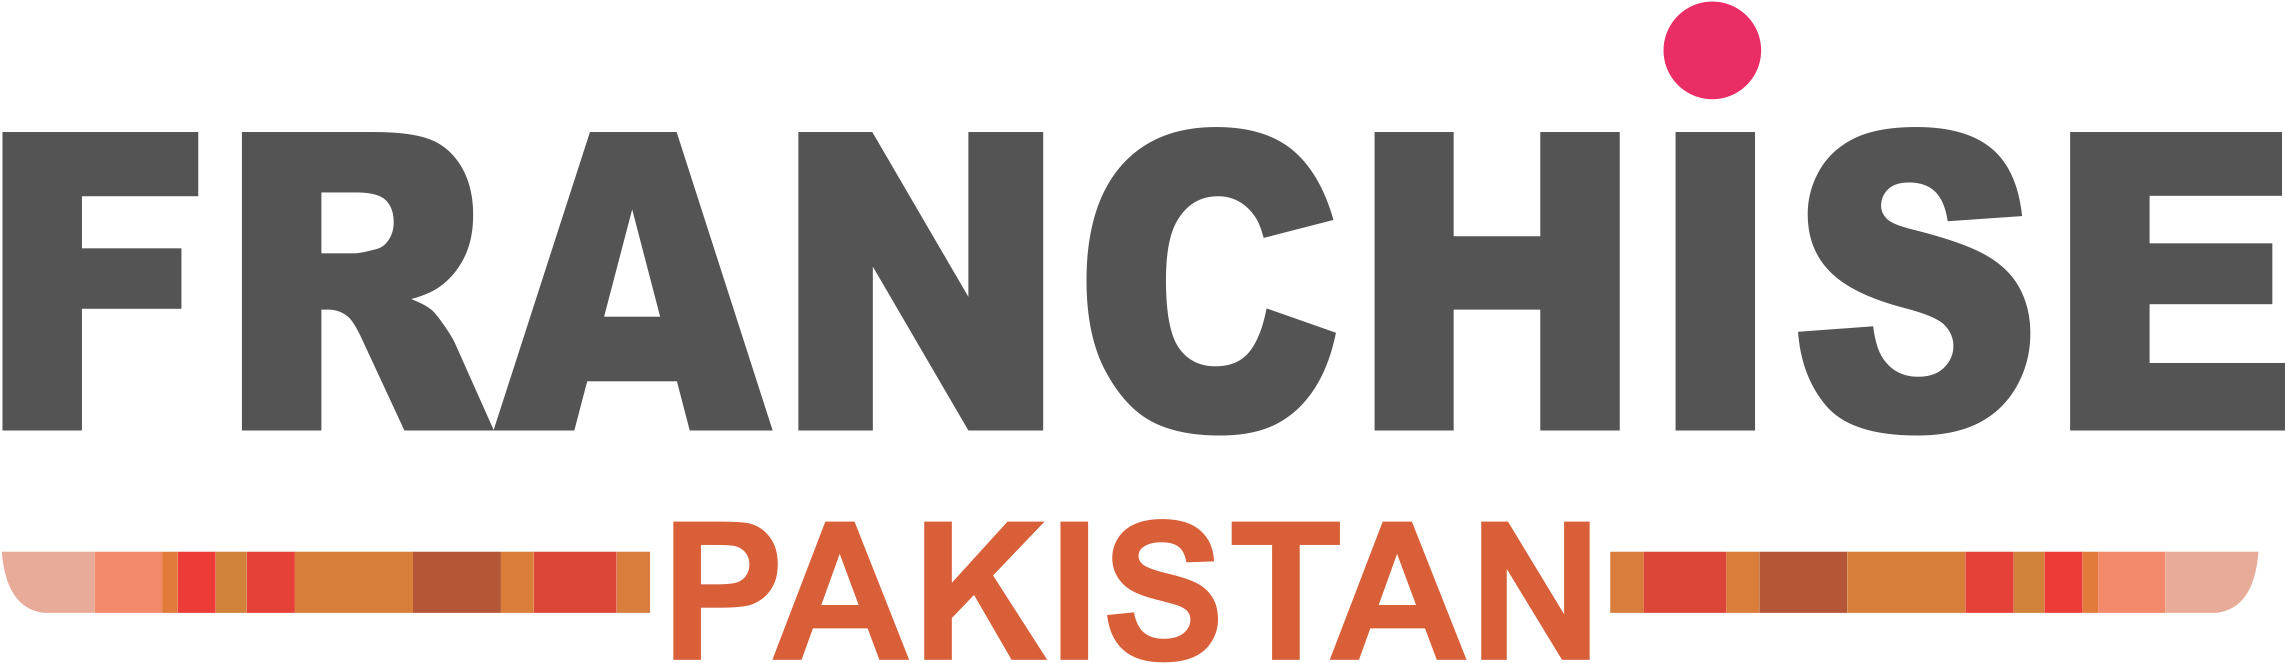 Top 9 American Fast Food Chains In Pakistan - Leisure Leagues (2306x690)